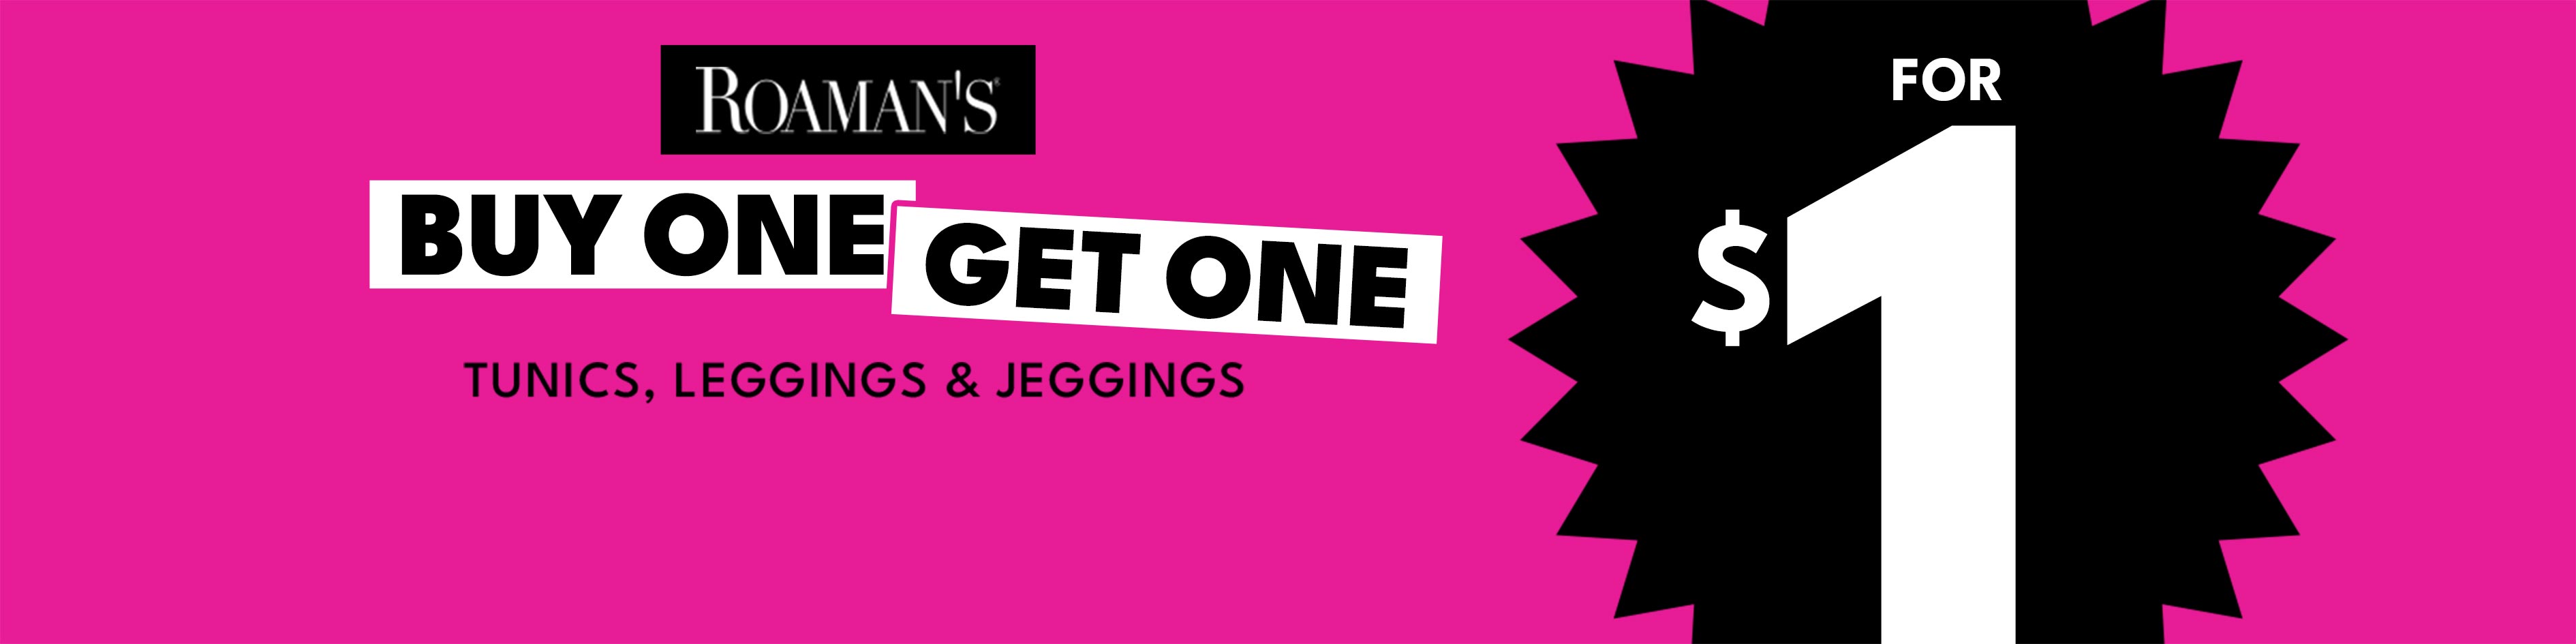 Romans buy one get one for $1 tunics, leggings & jeggings shop the sale